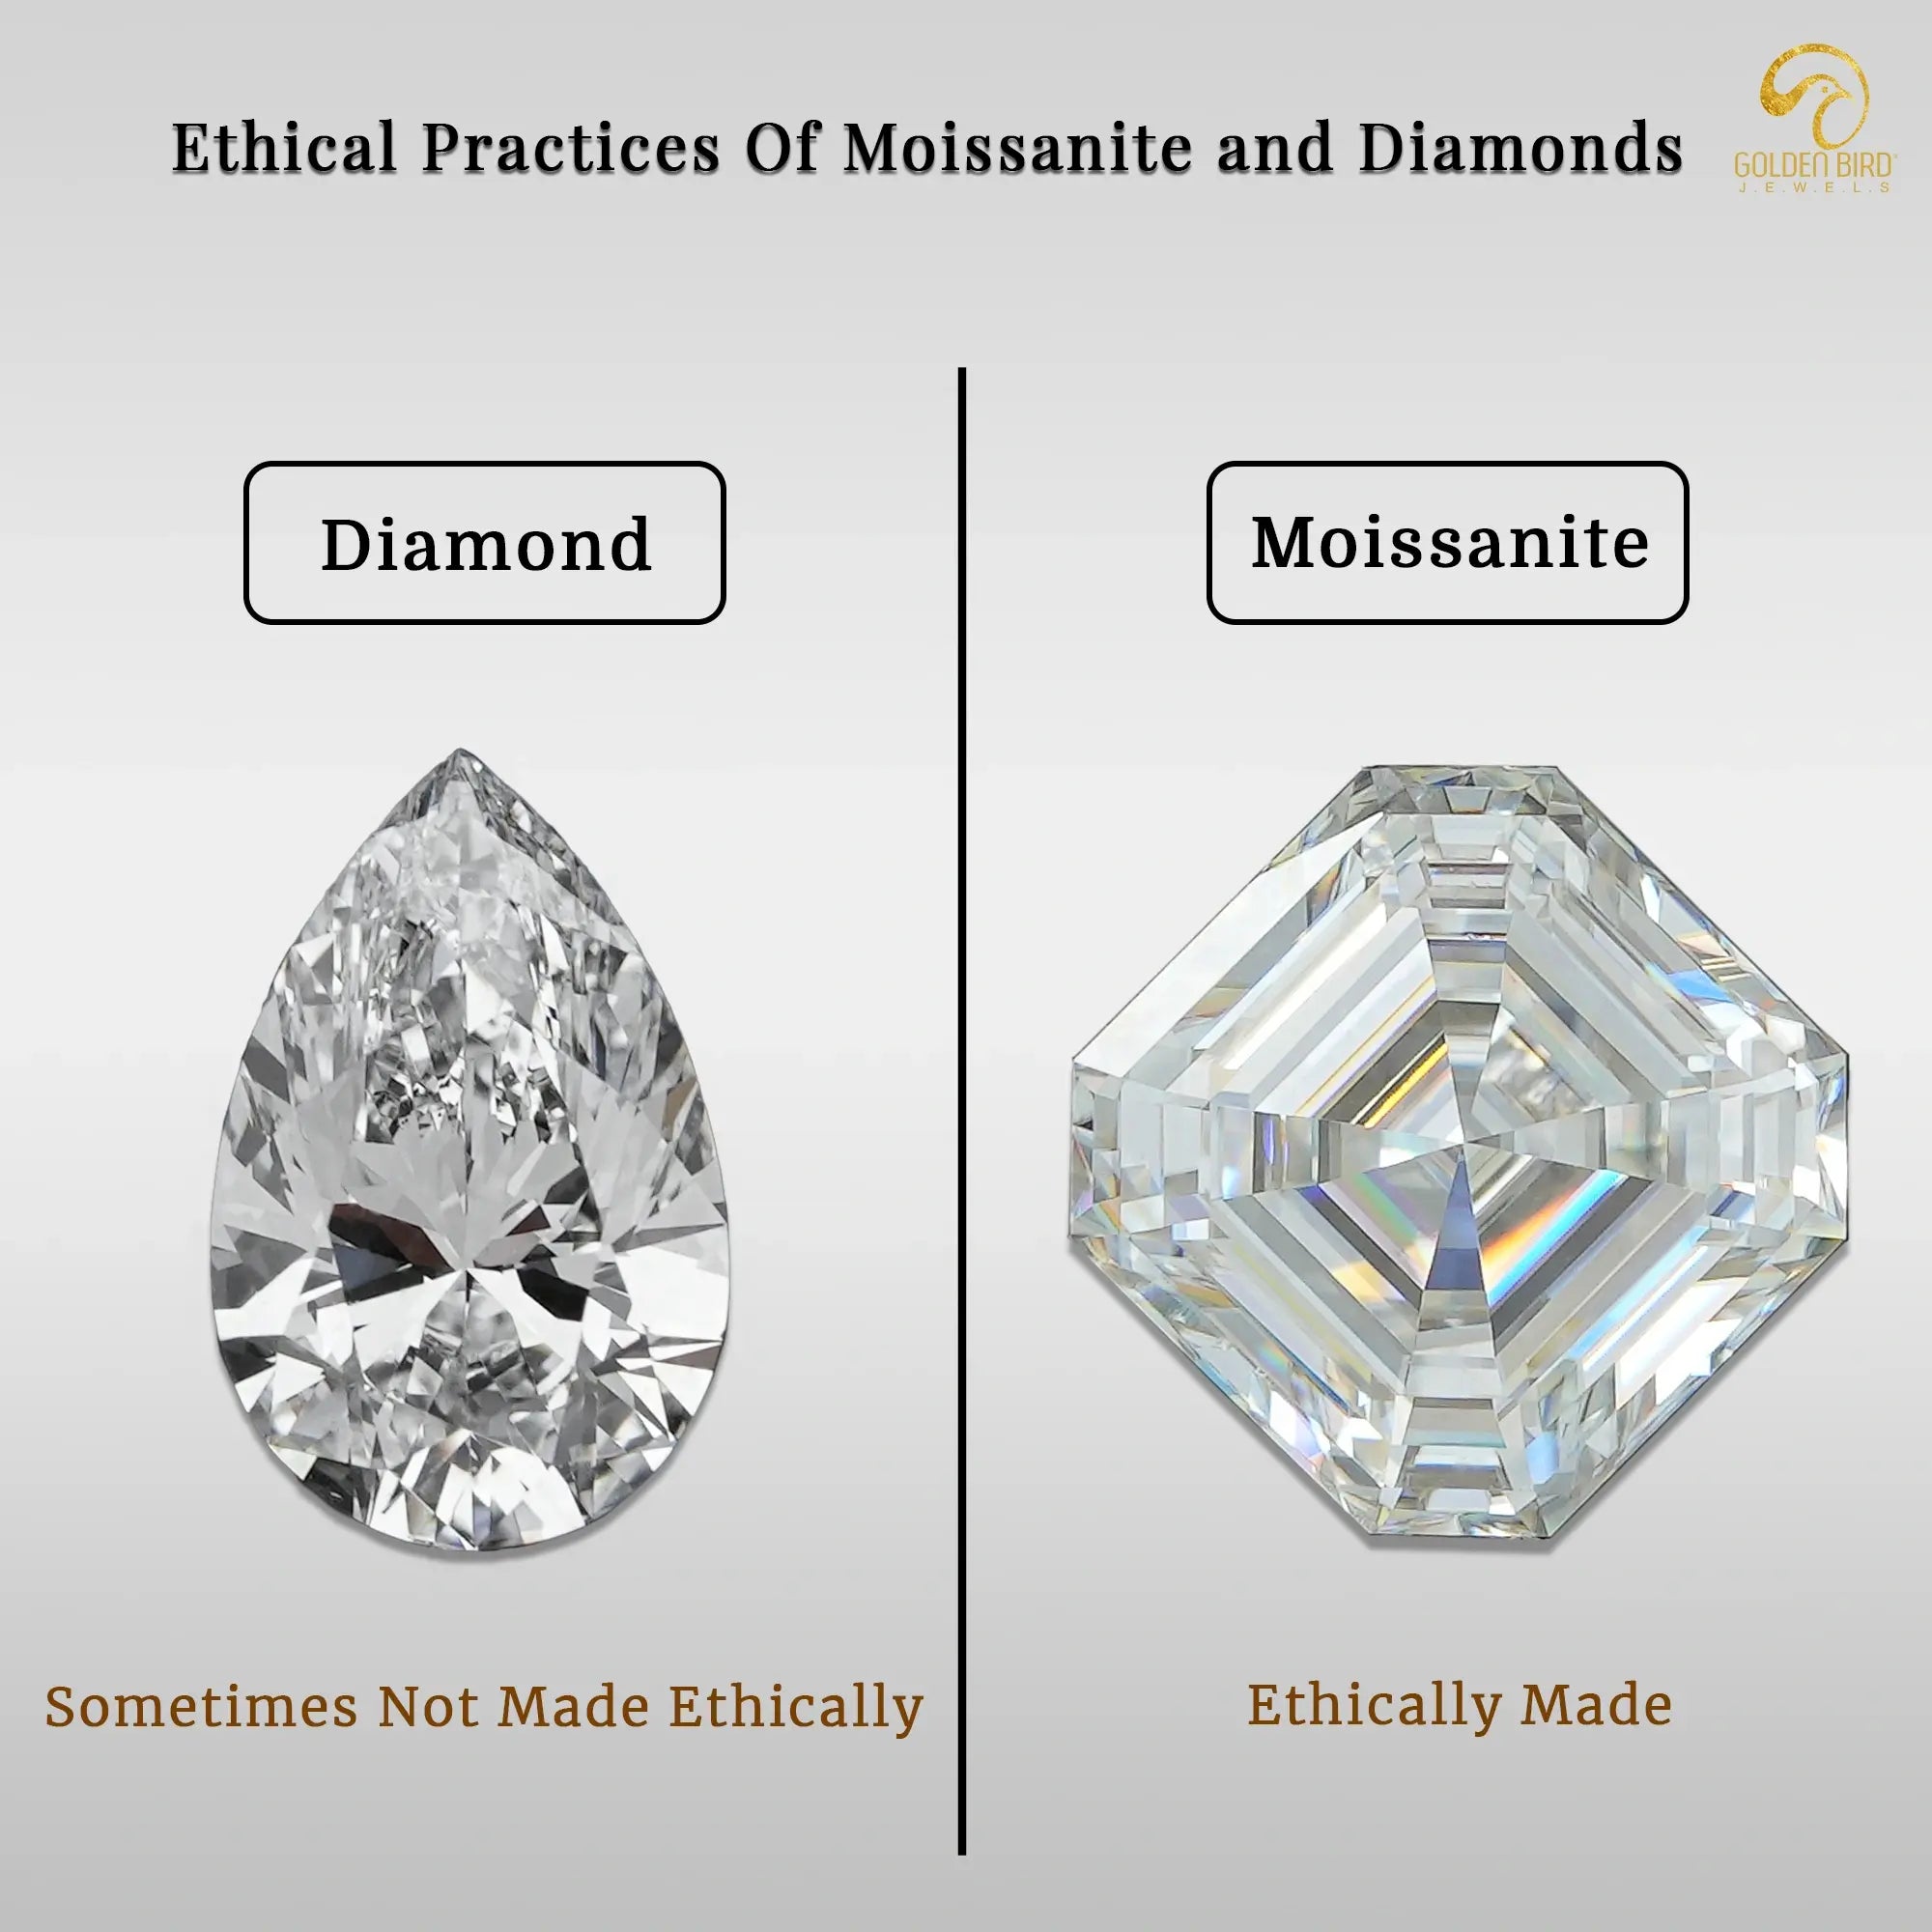 Ethical practices for diamond and moissanite reality check